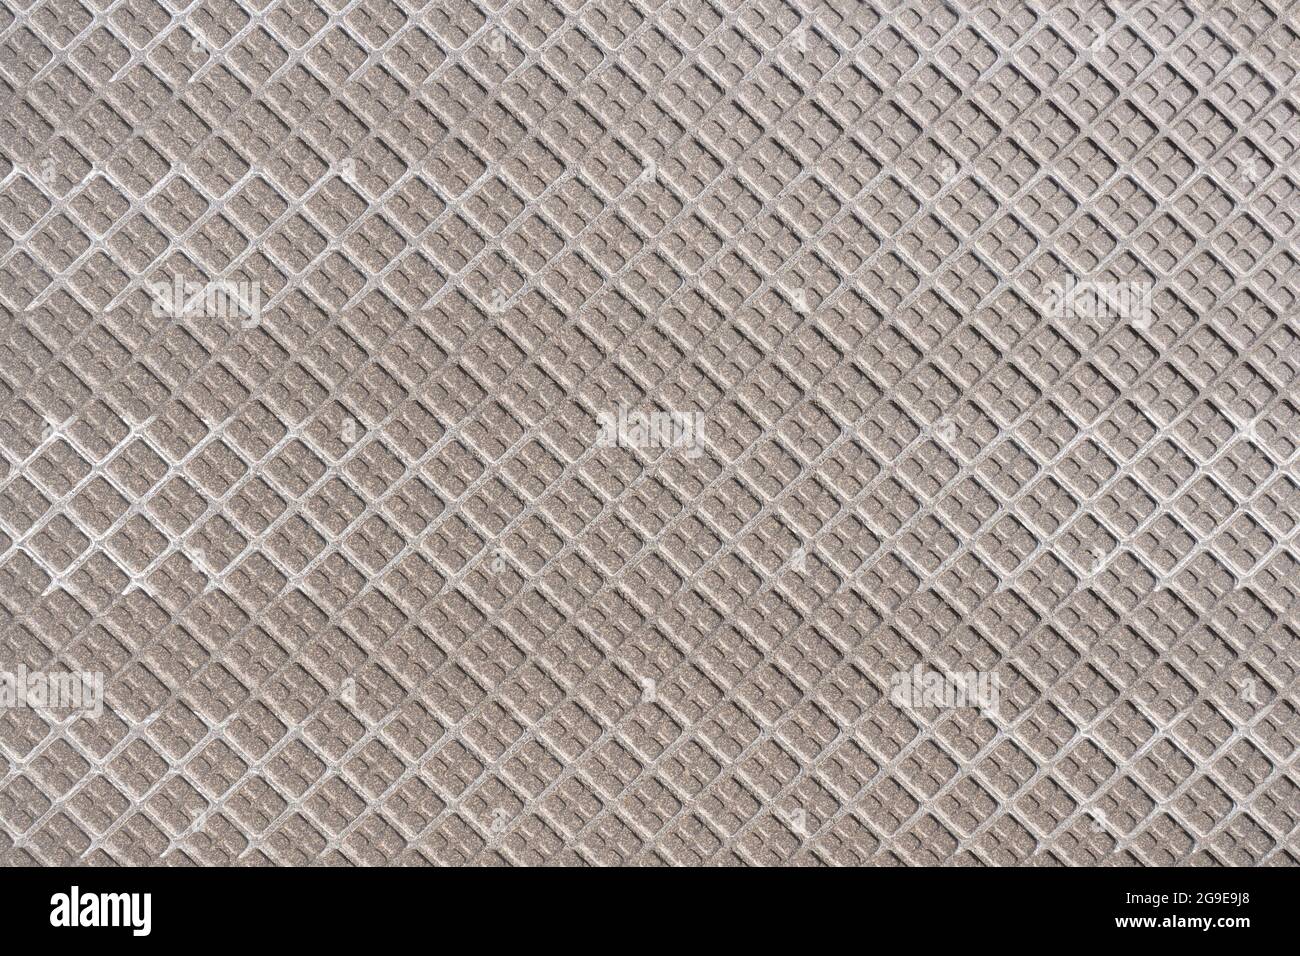 Back side of a large tile with pattern of squares Stock Photo